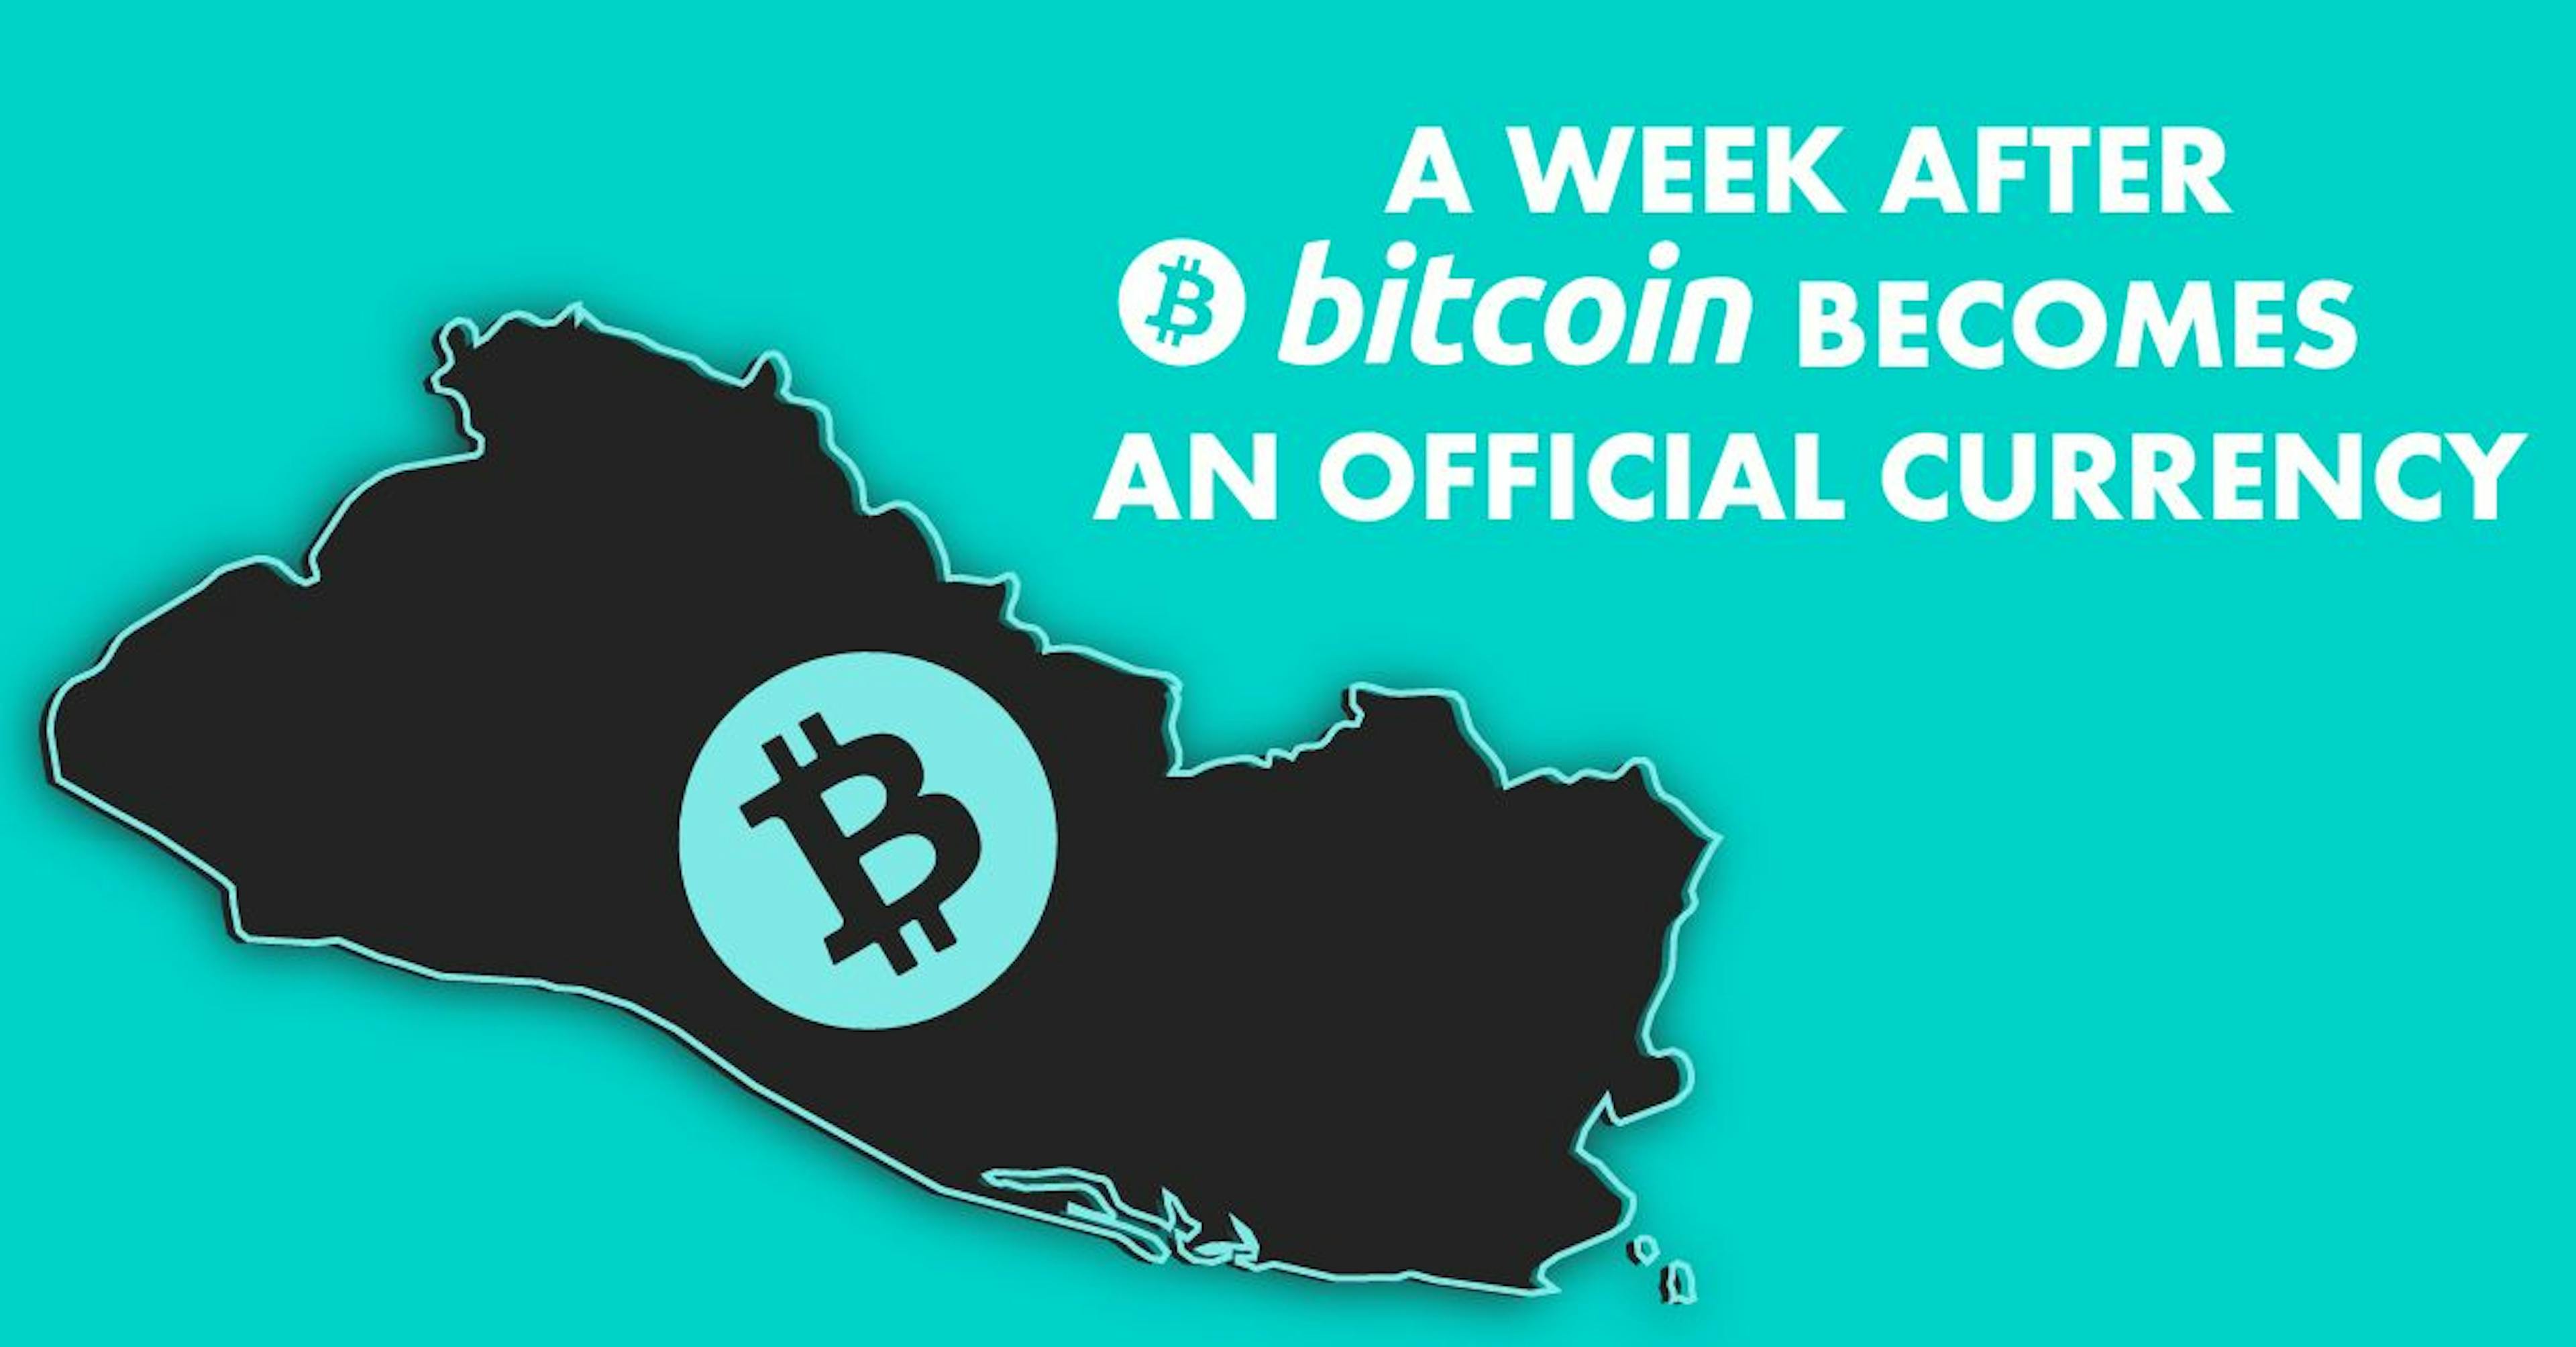 /el-salvador-a-week-after-bitcoin-became-an-official-currency feature image